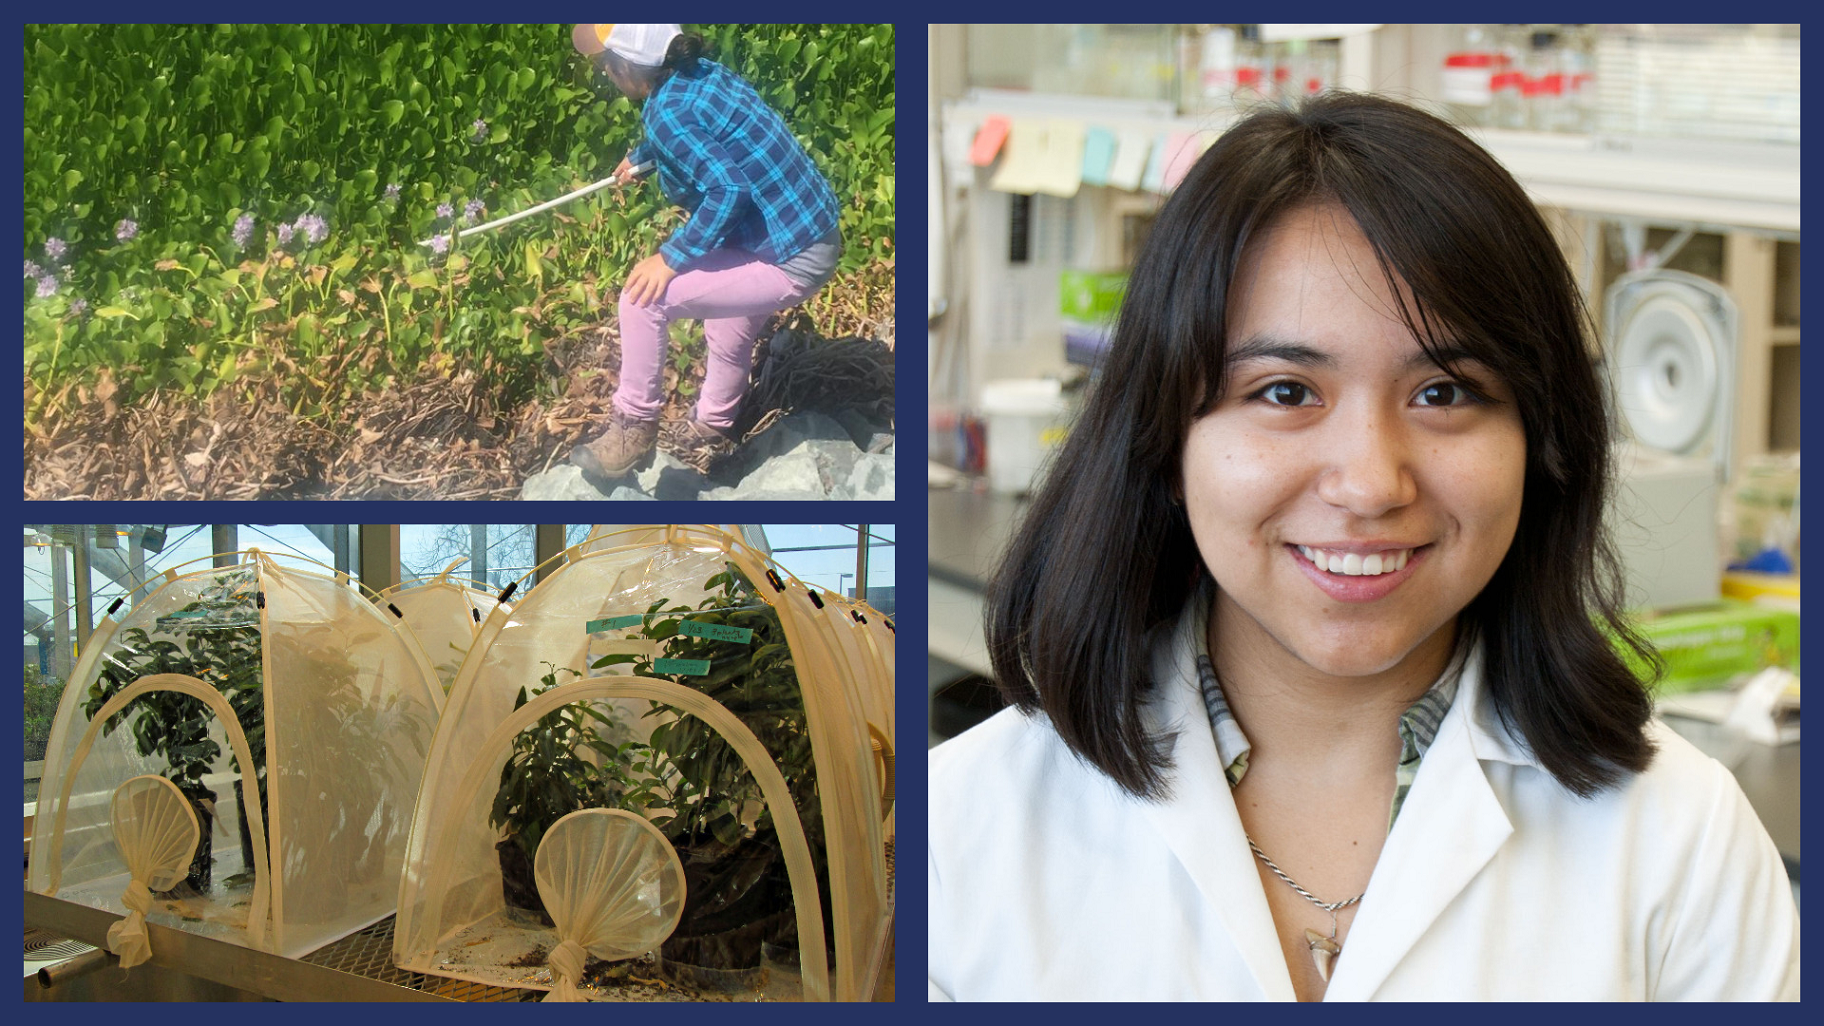 Three Images: Top Left, Spraying Plants. Bottom Left, Contained Plants. Right, Jessica Franco in Lab